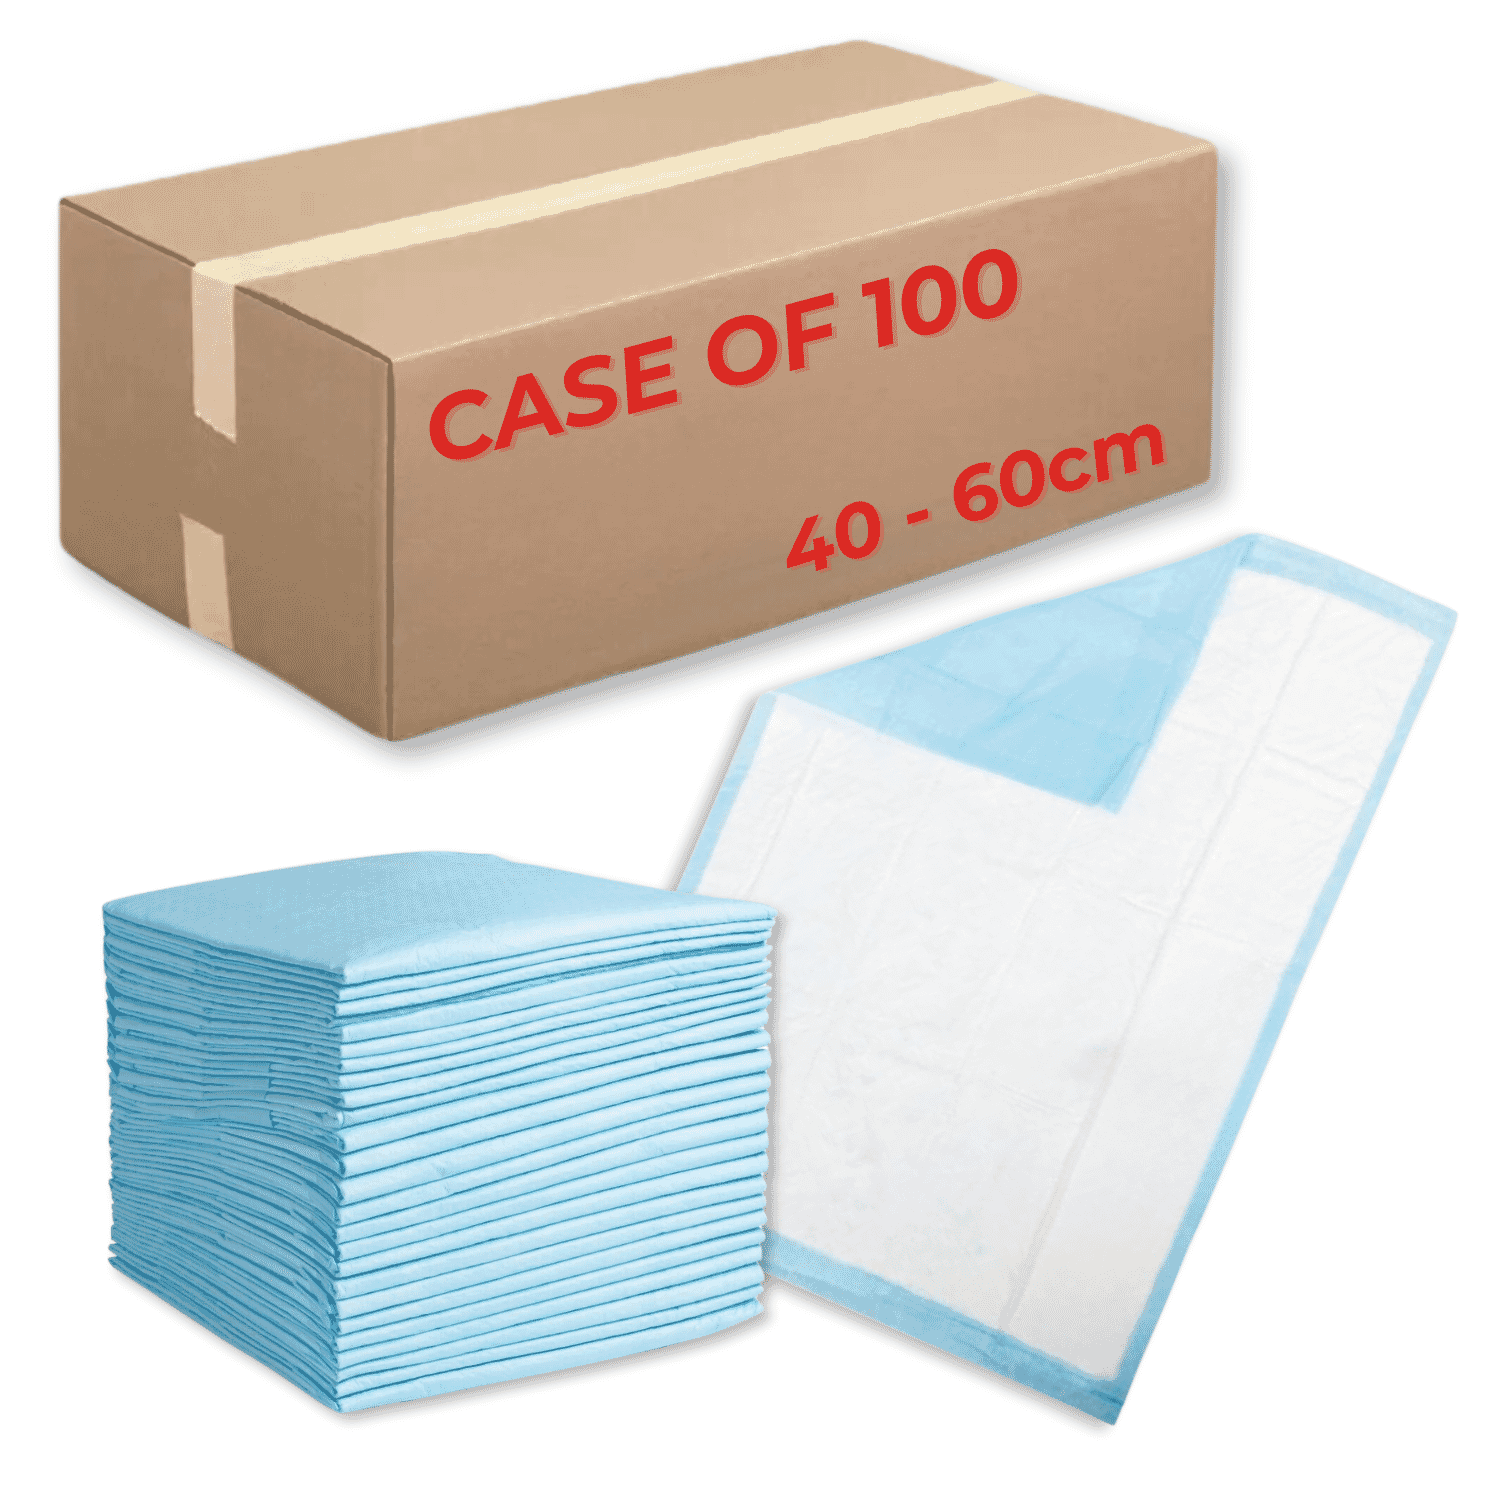 View Disposable Chair Pads 40cms x 60cms Case of 100 information